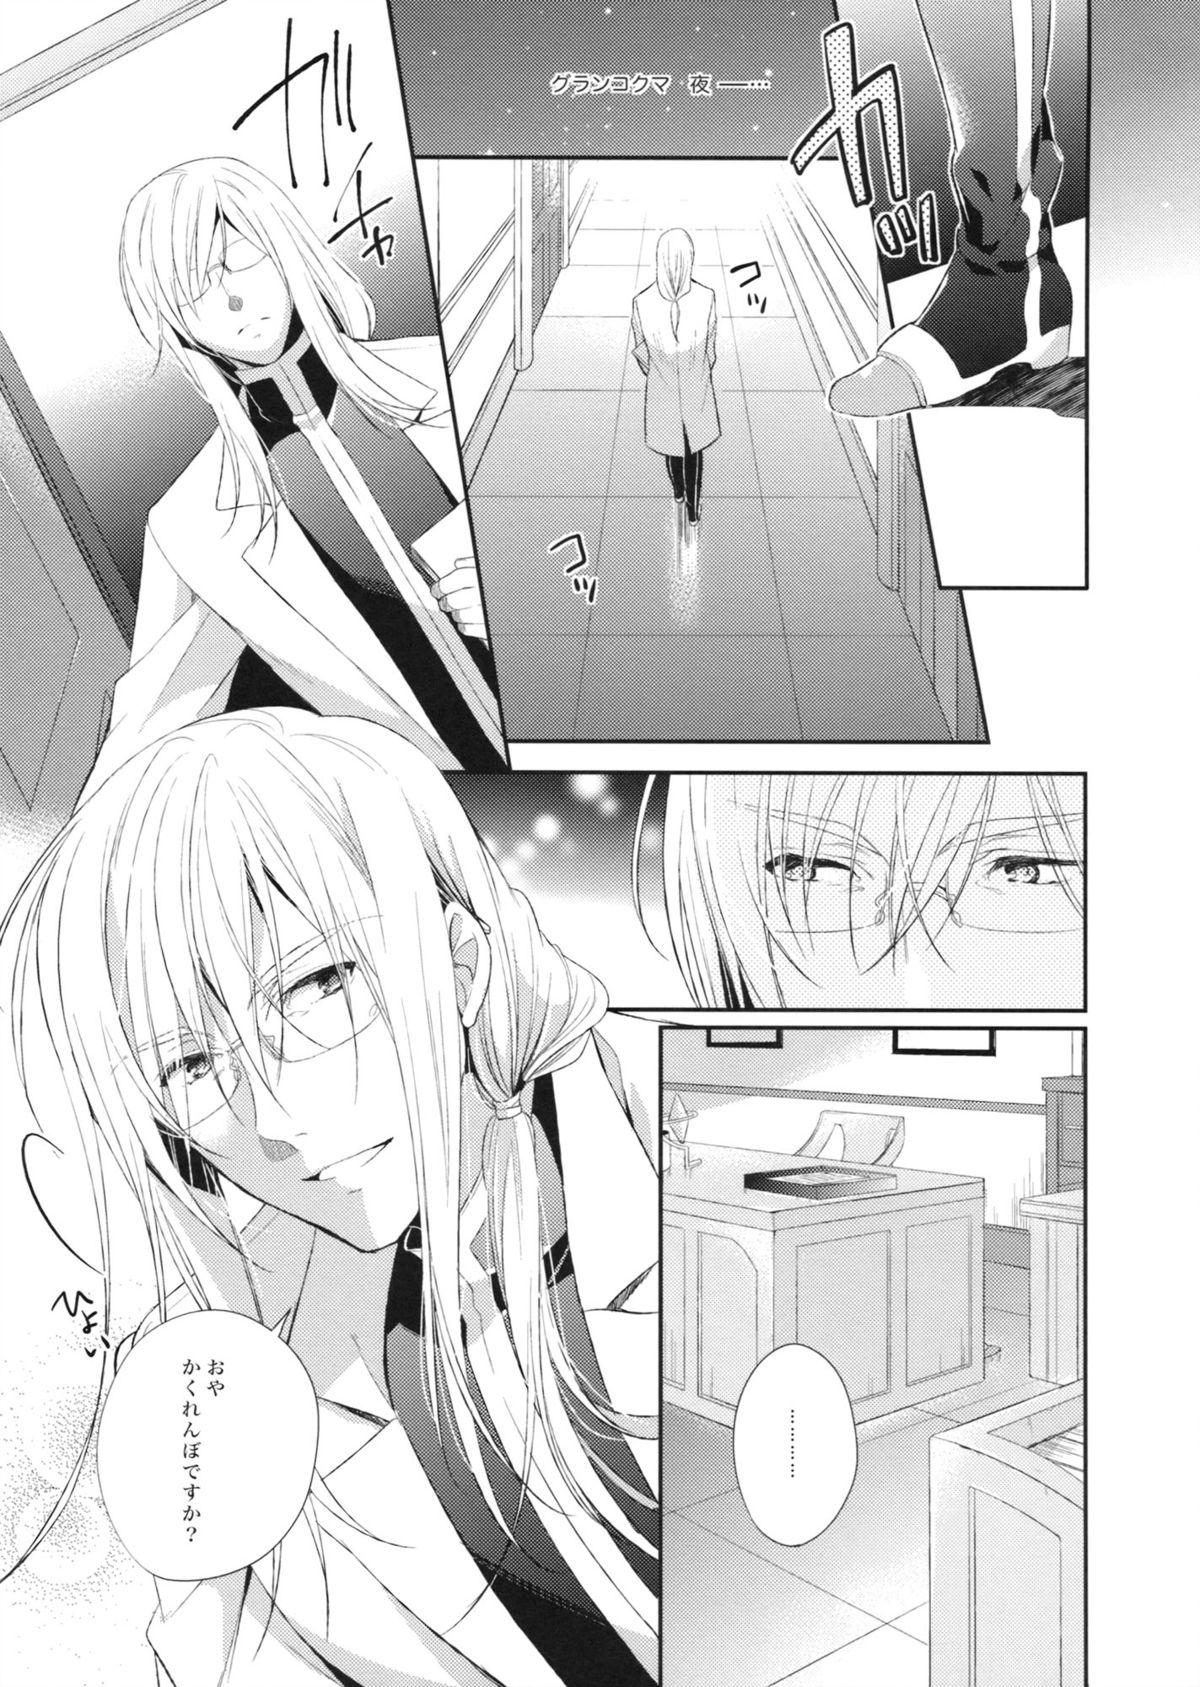 Oil Oose no Mama ni - Tales of the abyss Dorm - Page 2